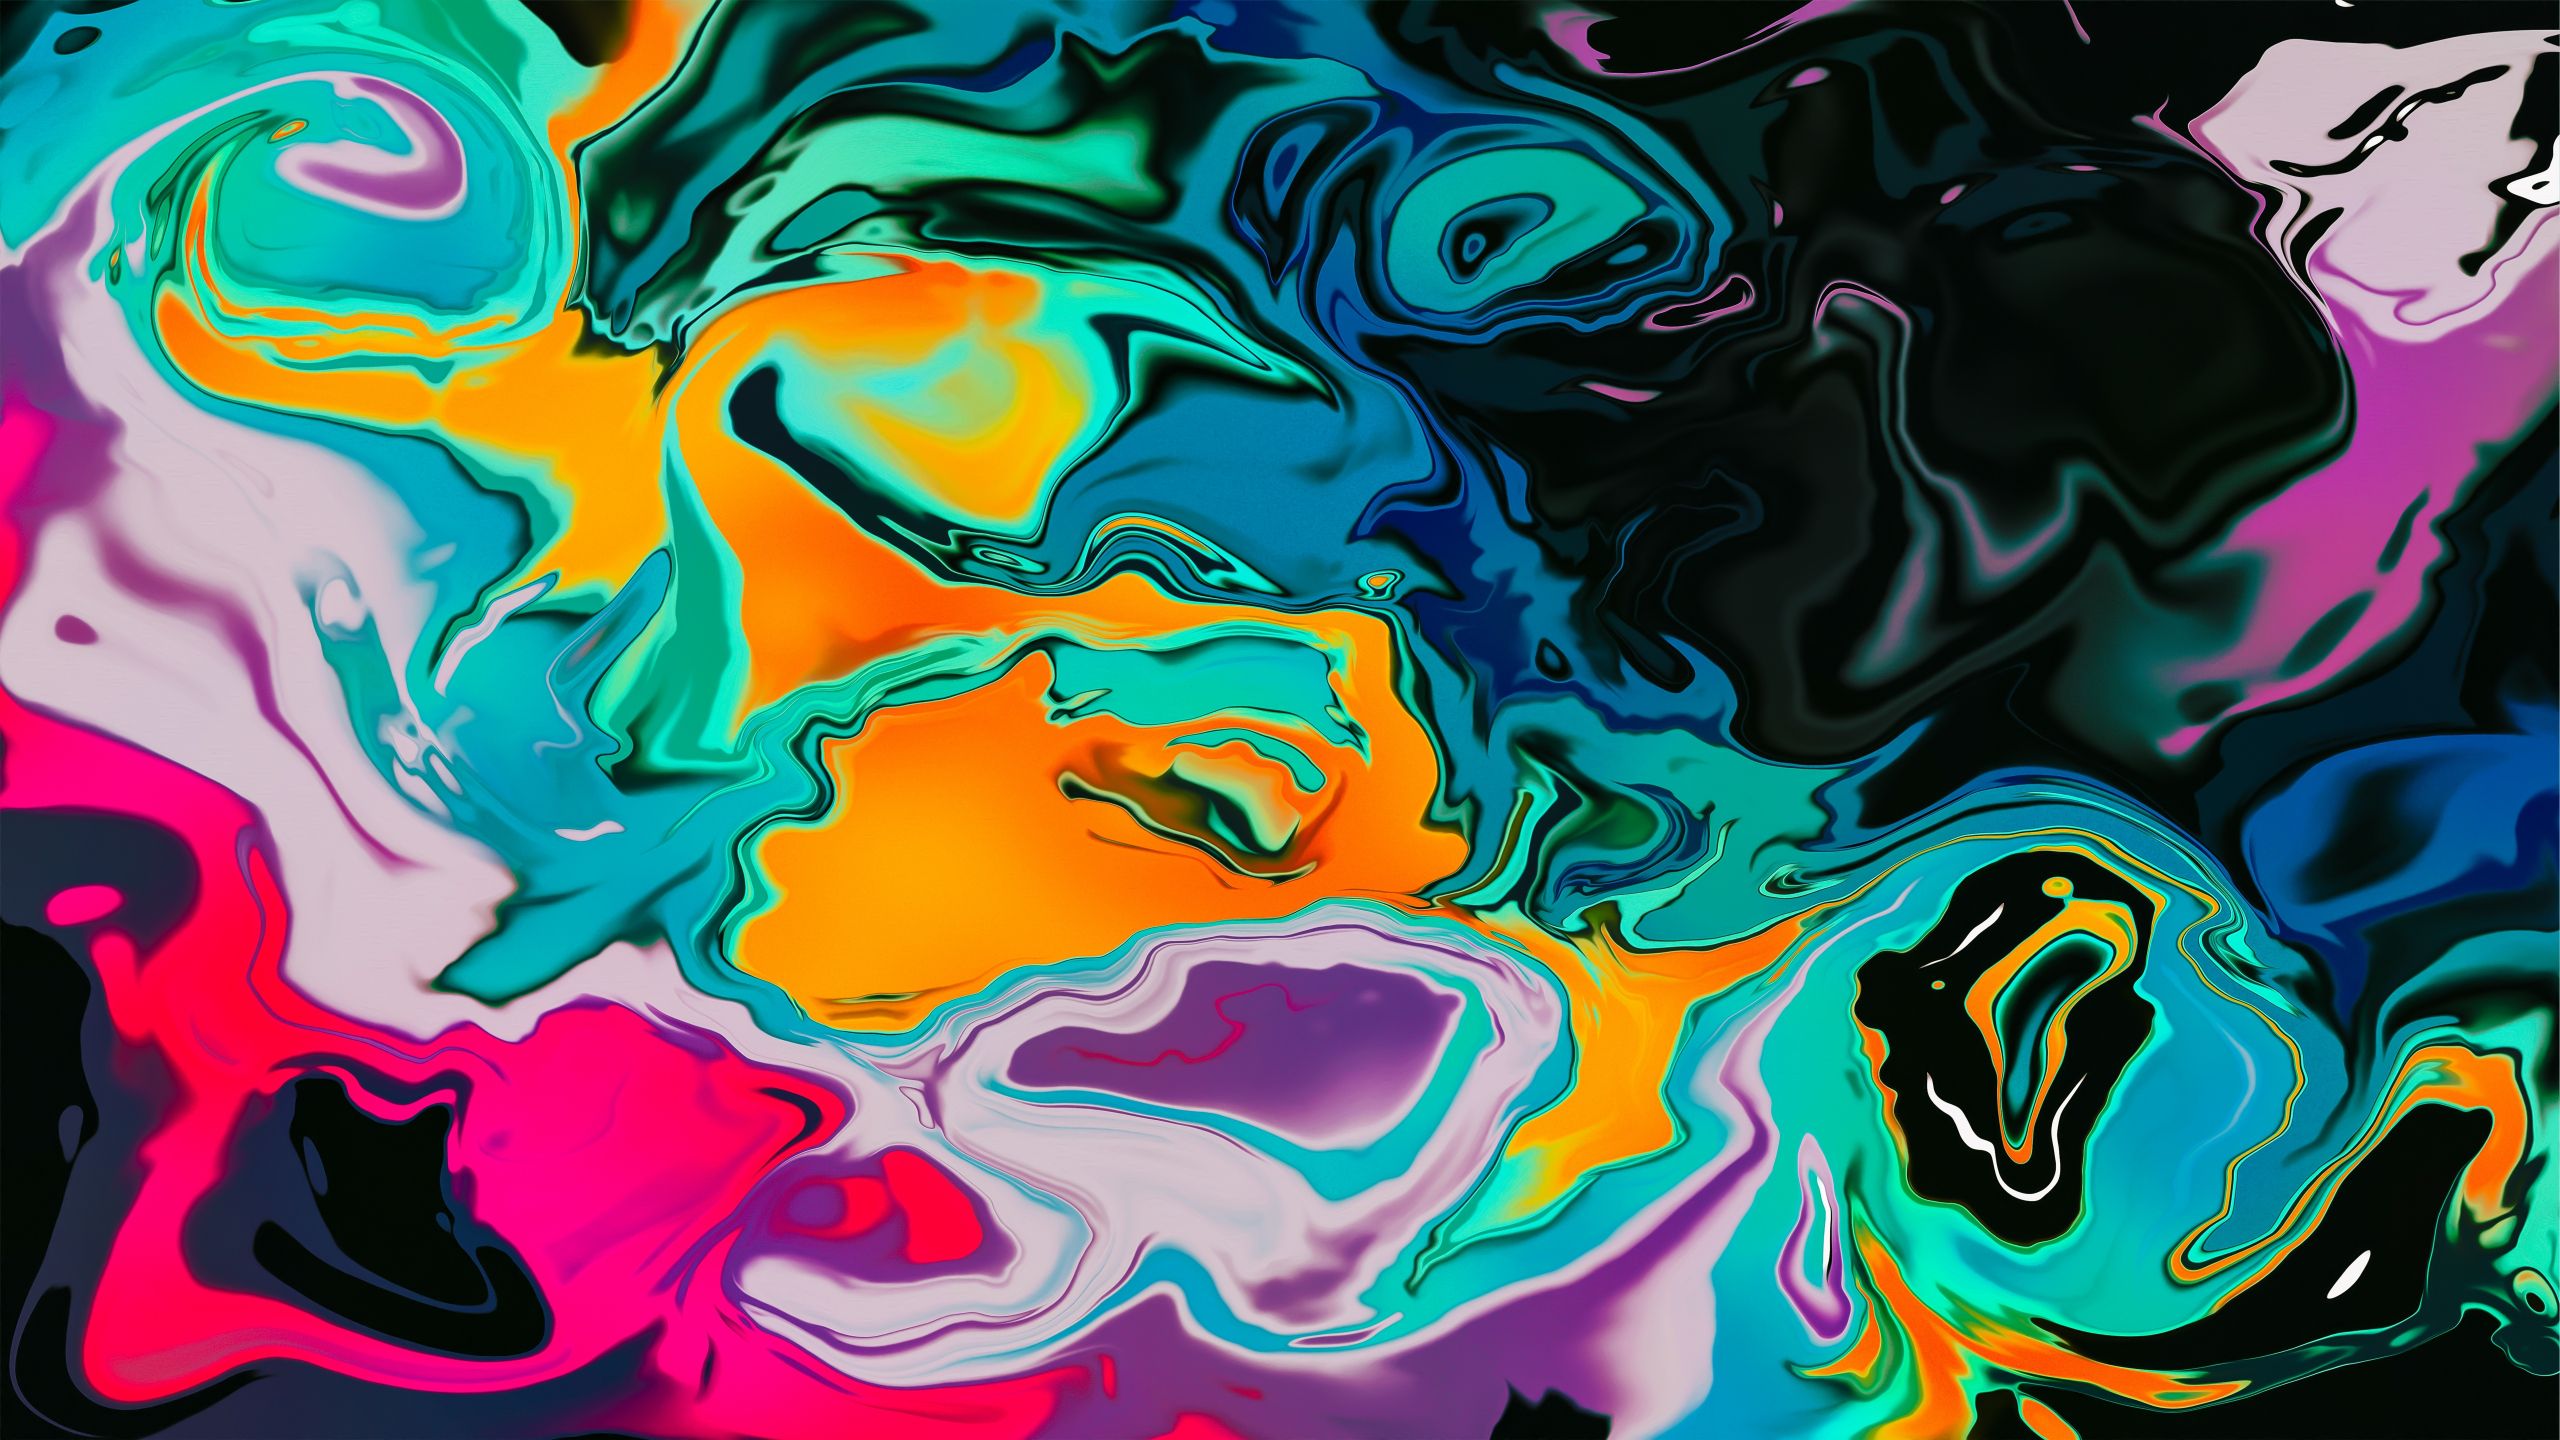 A colorful abstract painting with swirling colors of blue, green, pink, and purple. - 2560x1440